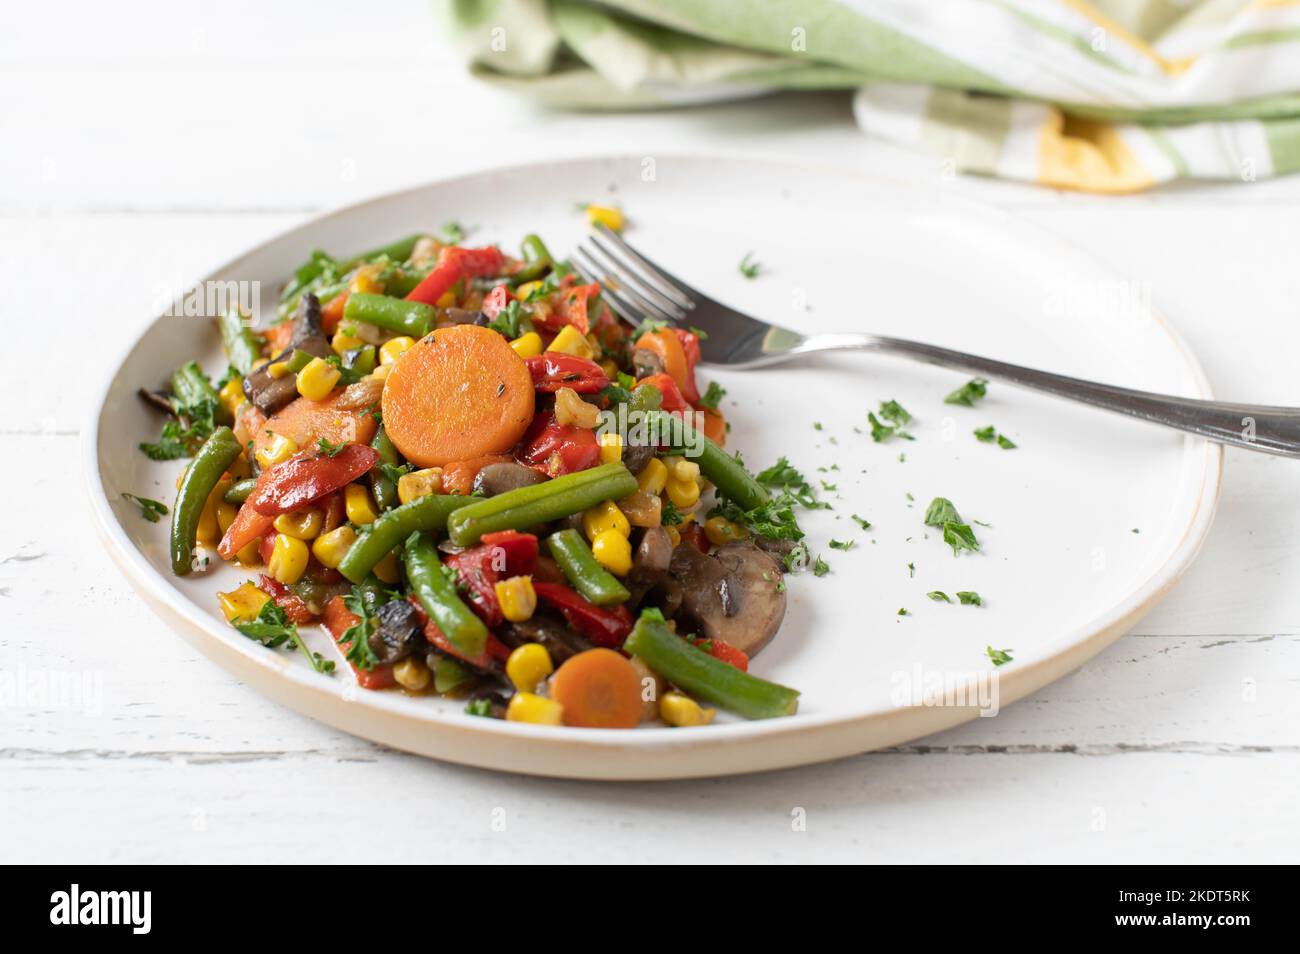 Cooked vegetables on a plate for healthy side dish Stock Photo